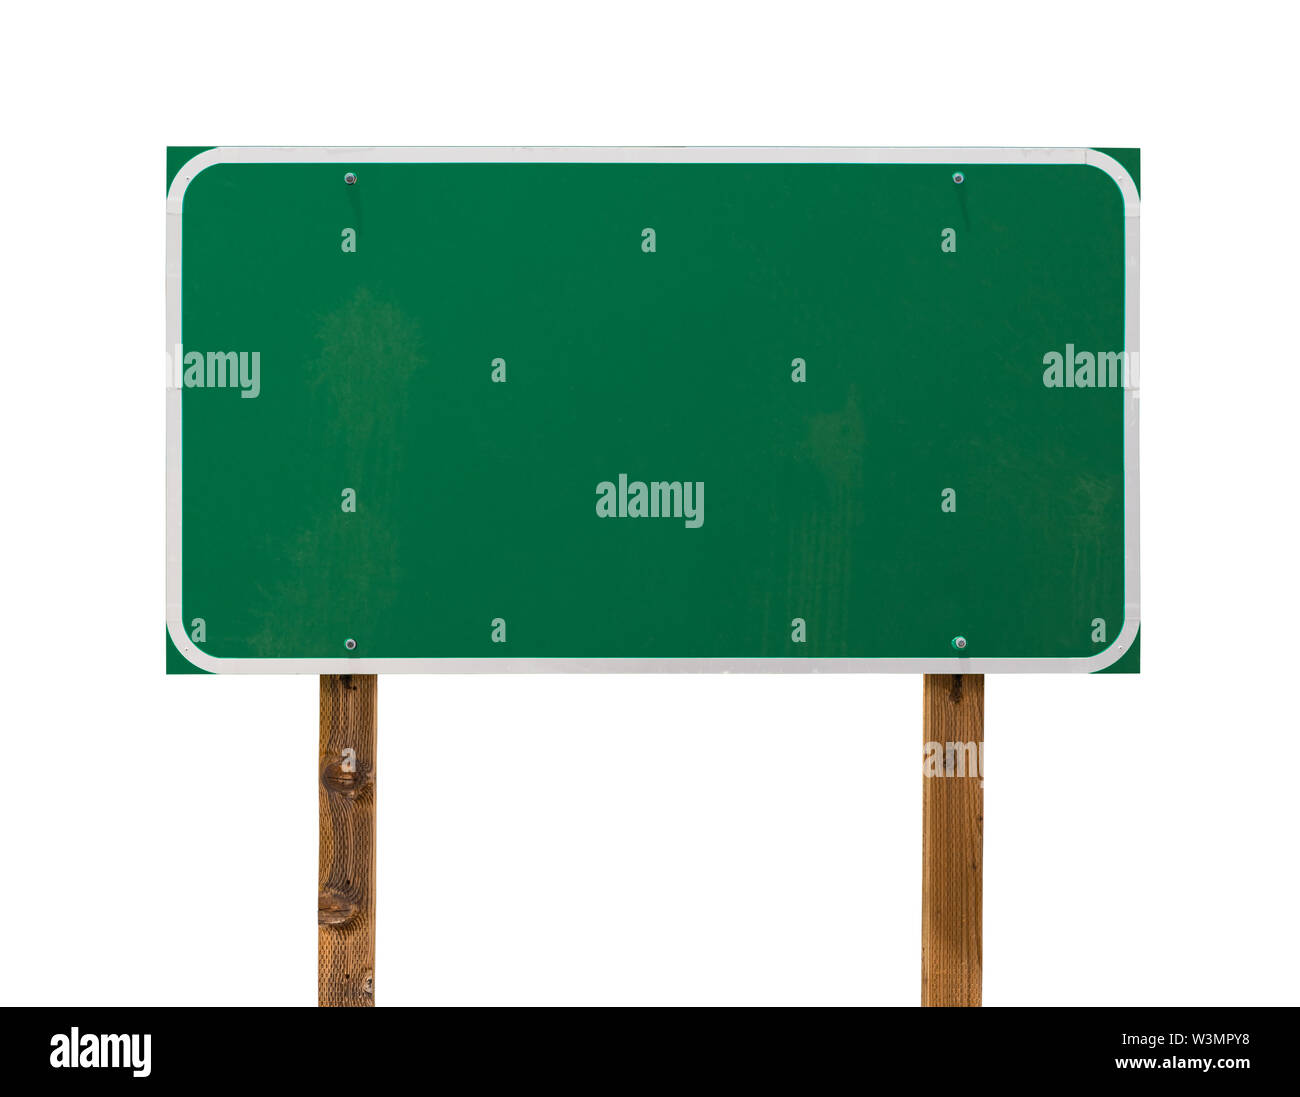 Blank Green Road Sign with Wooden Posts Isolated on a White Background. Stock Photo